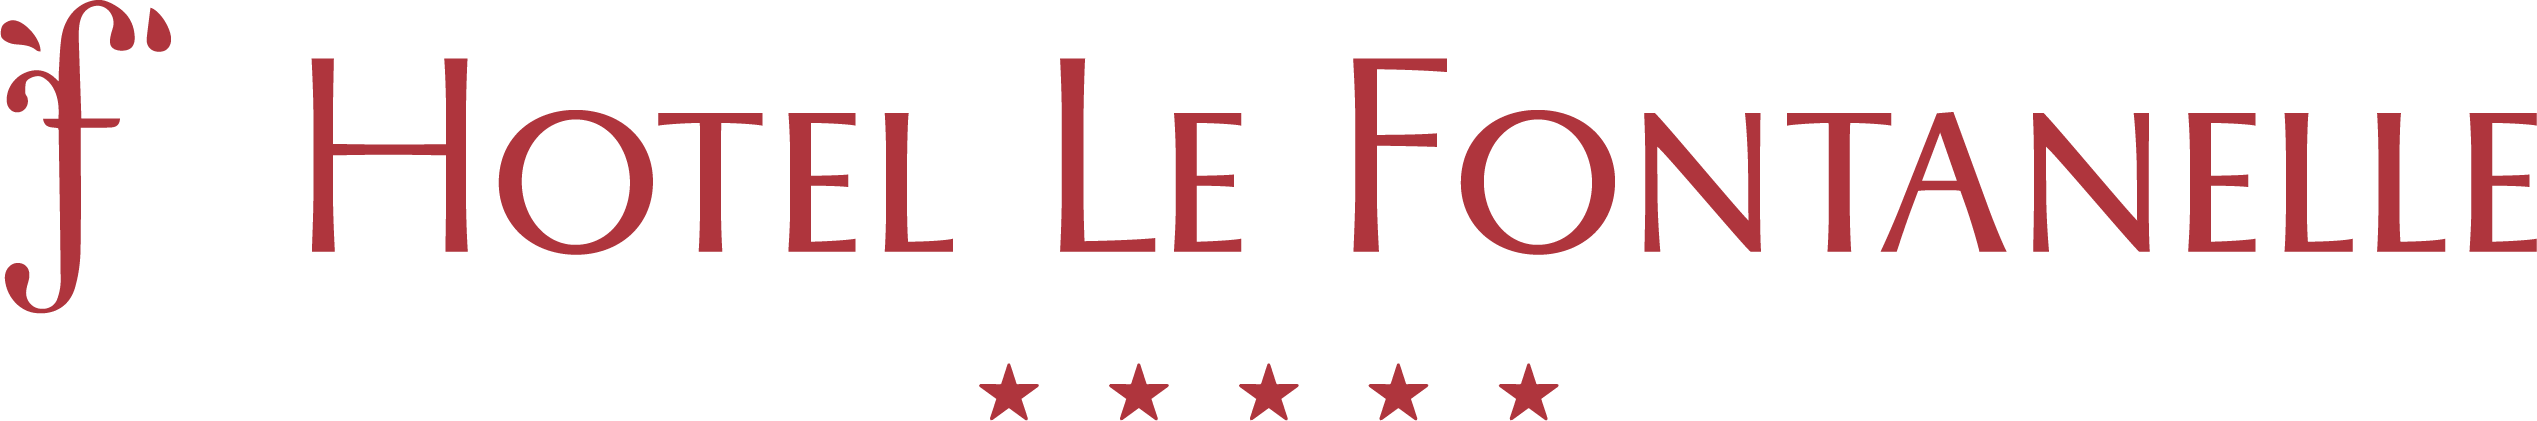 HOTEL LE FONTANELLE_LOGO_ROSSO_no payoff